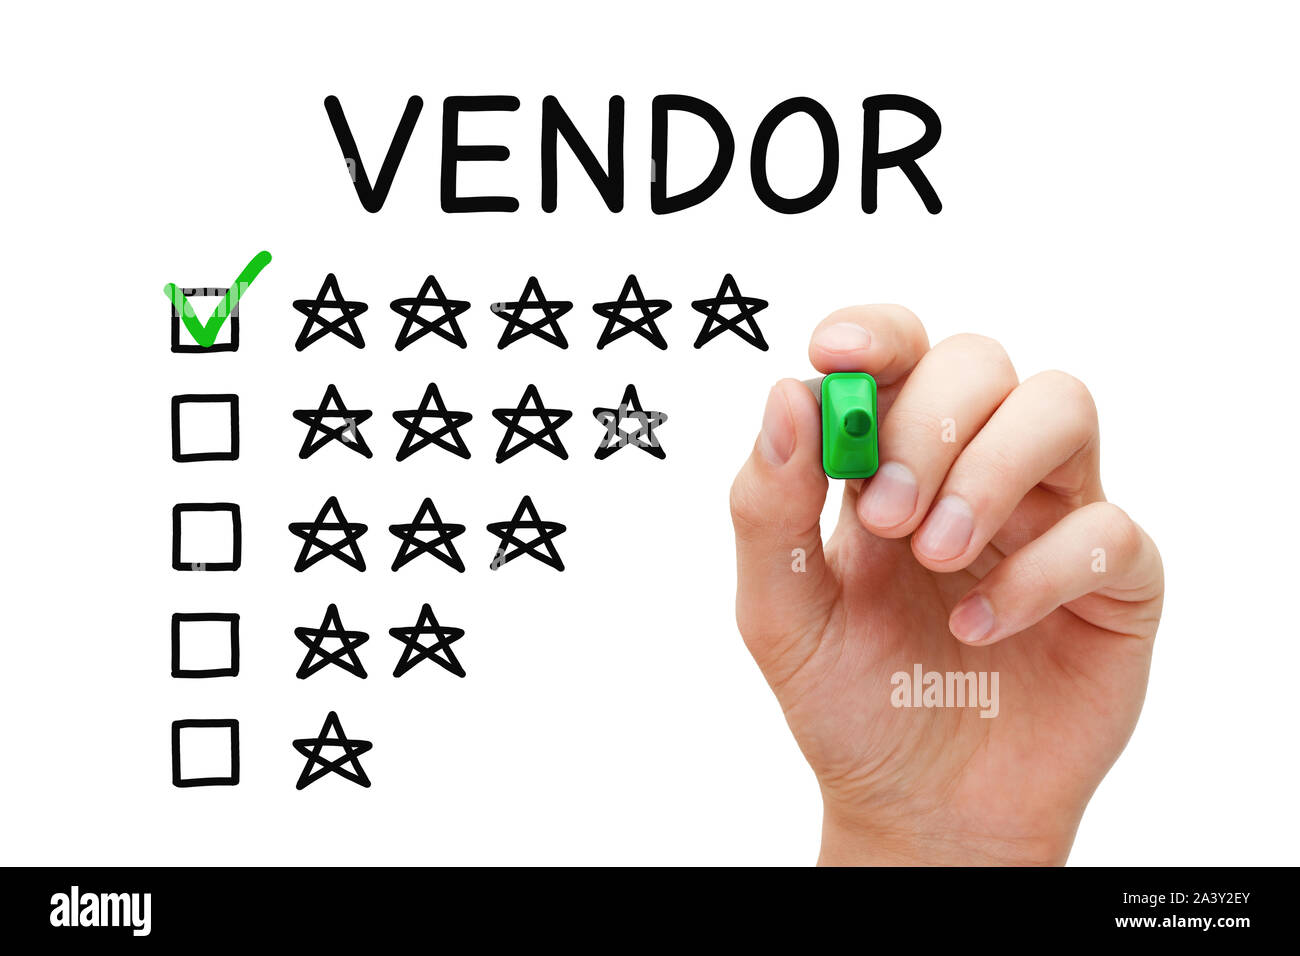 Satisfied customer putting check mark with green marker on five star rating in vendor evaluation feedback form. Stock Photo